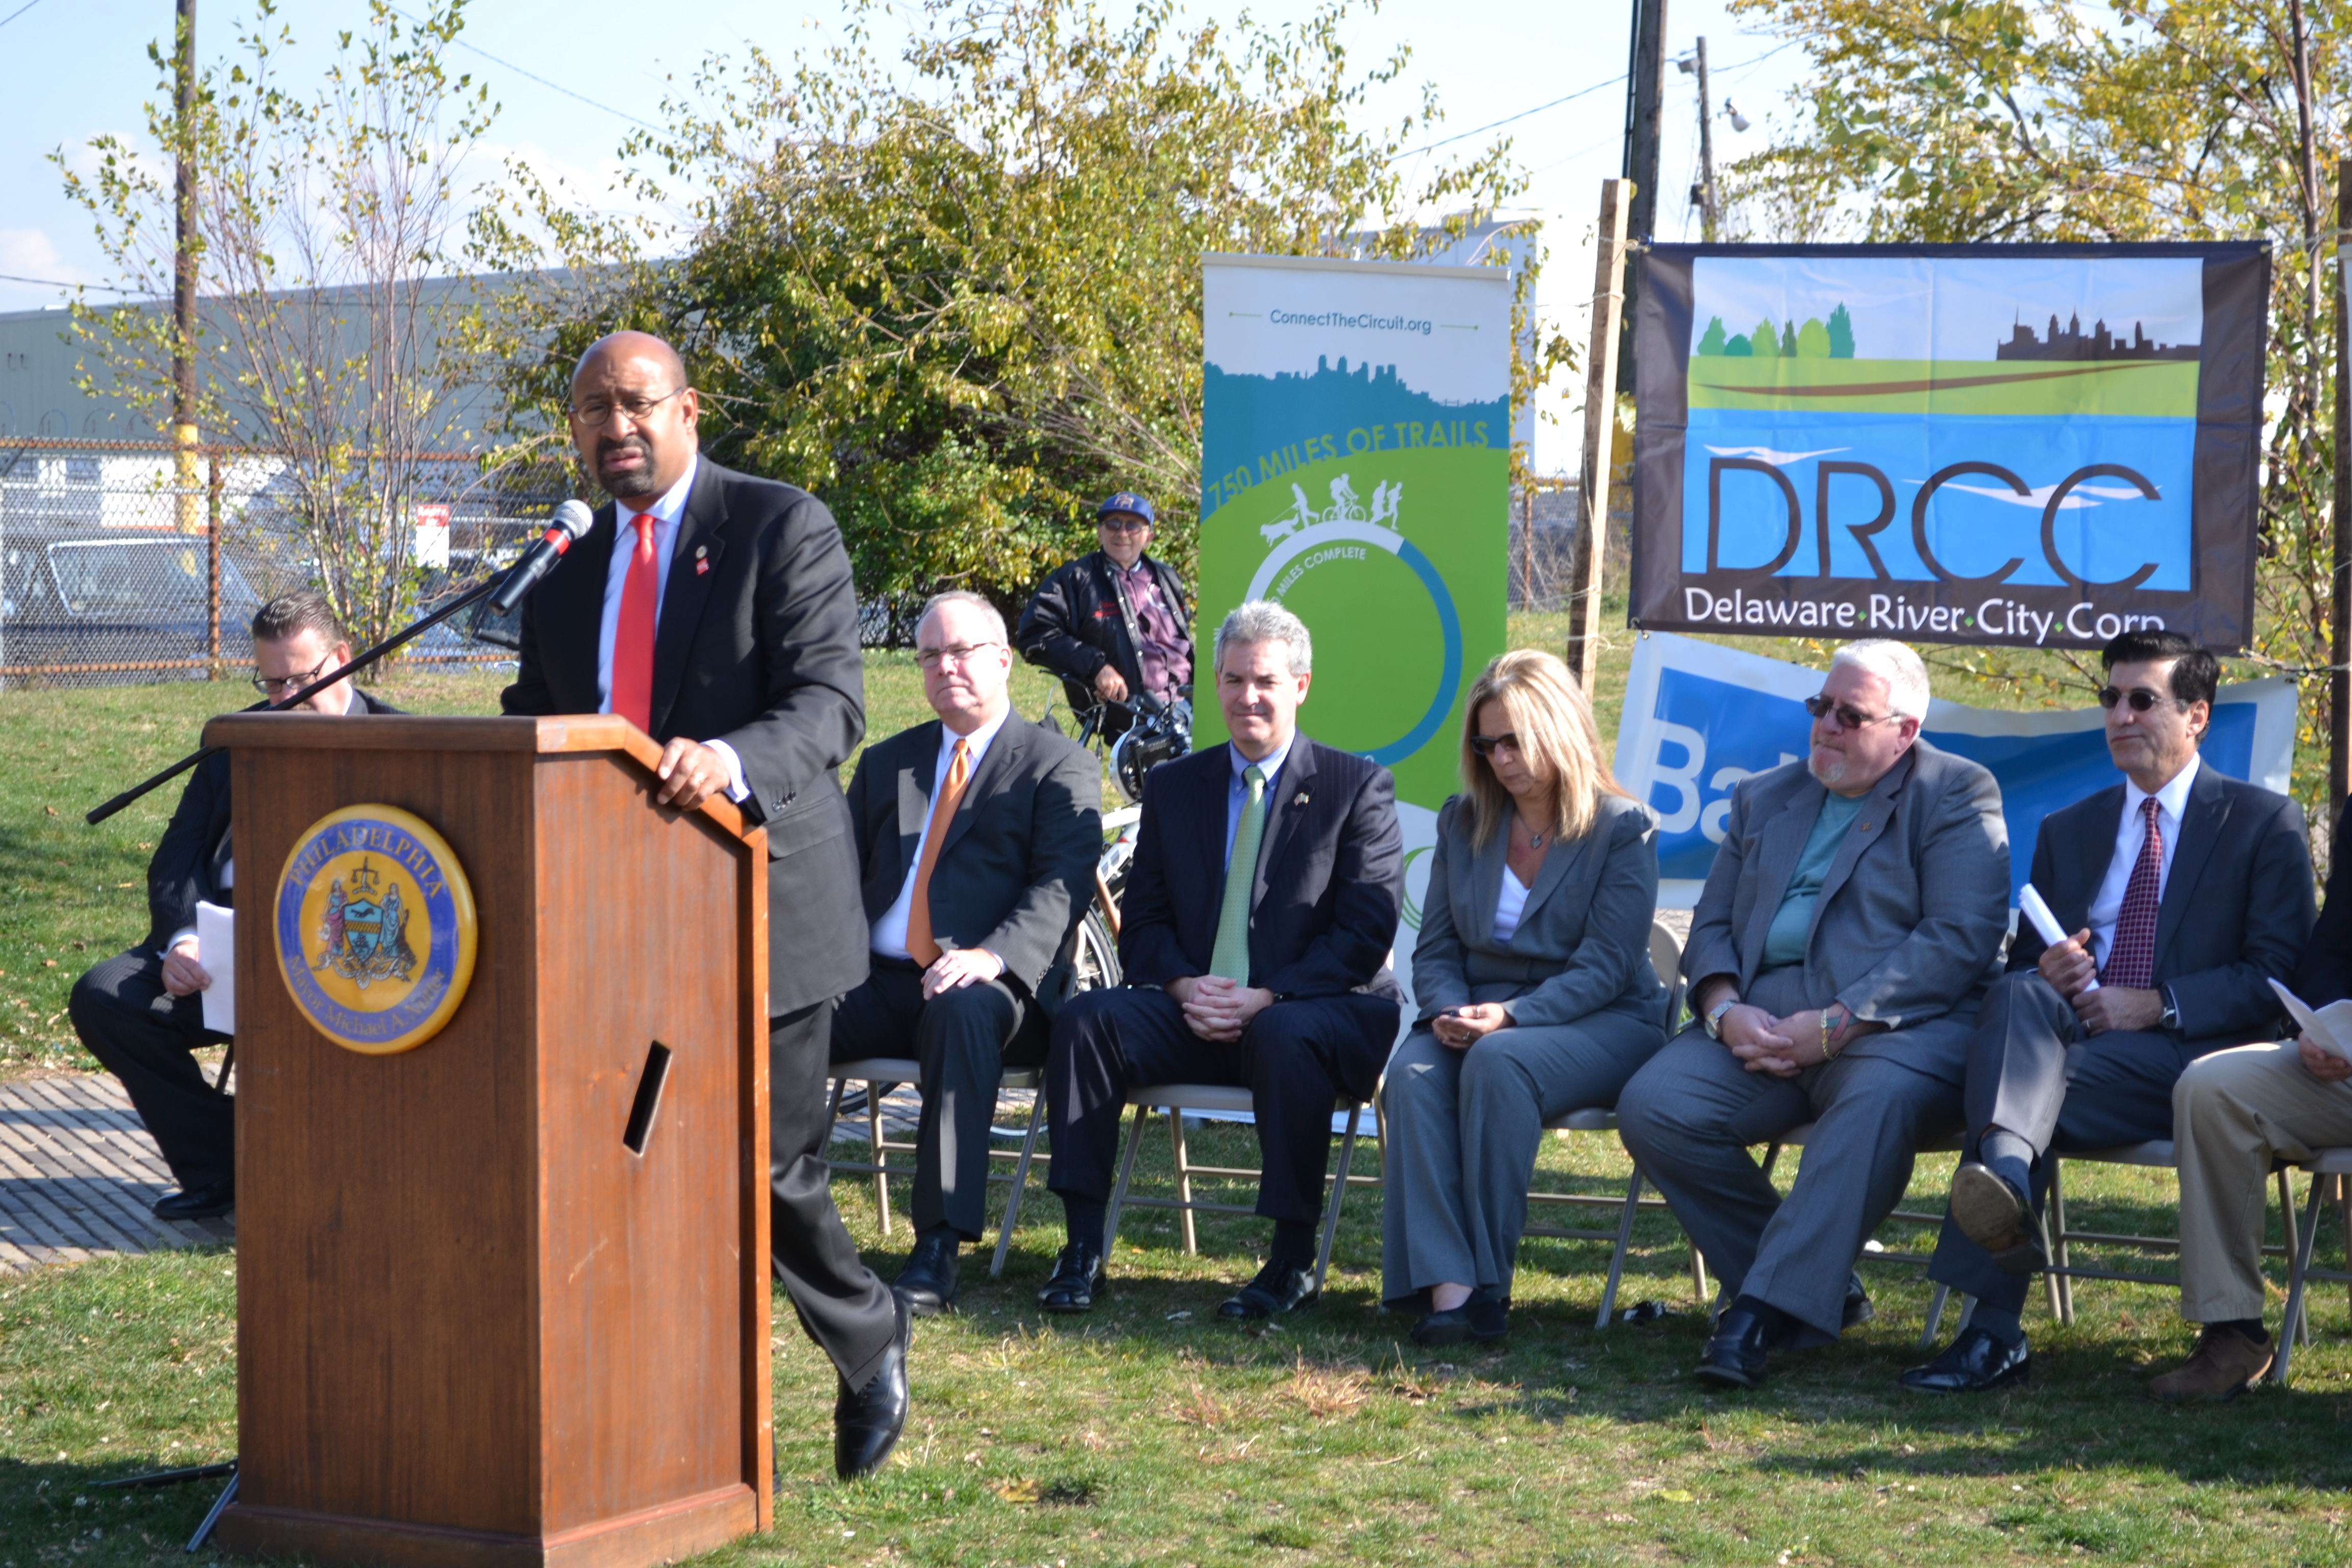 Mayor Nutter spoke at the ribbon cutting ceremony, where he also accepted a $200,000 EPA grant